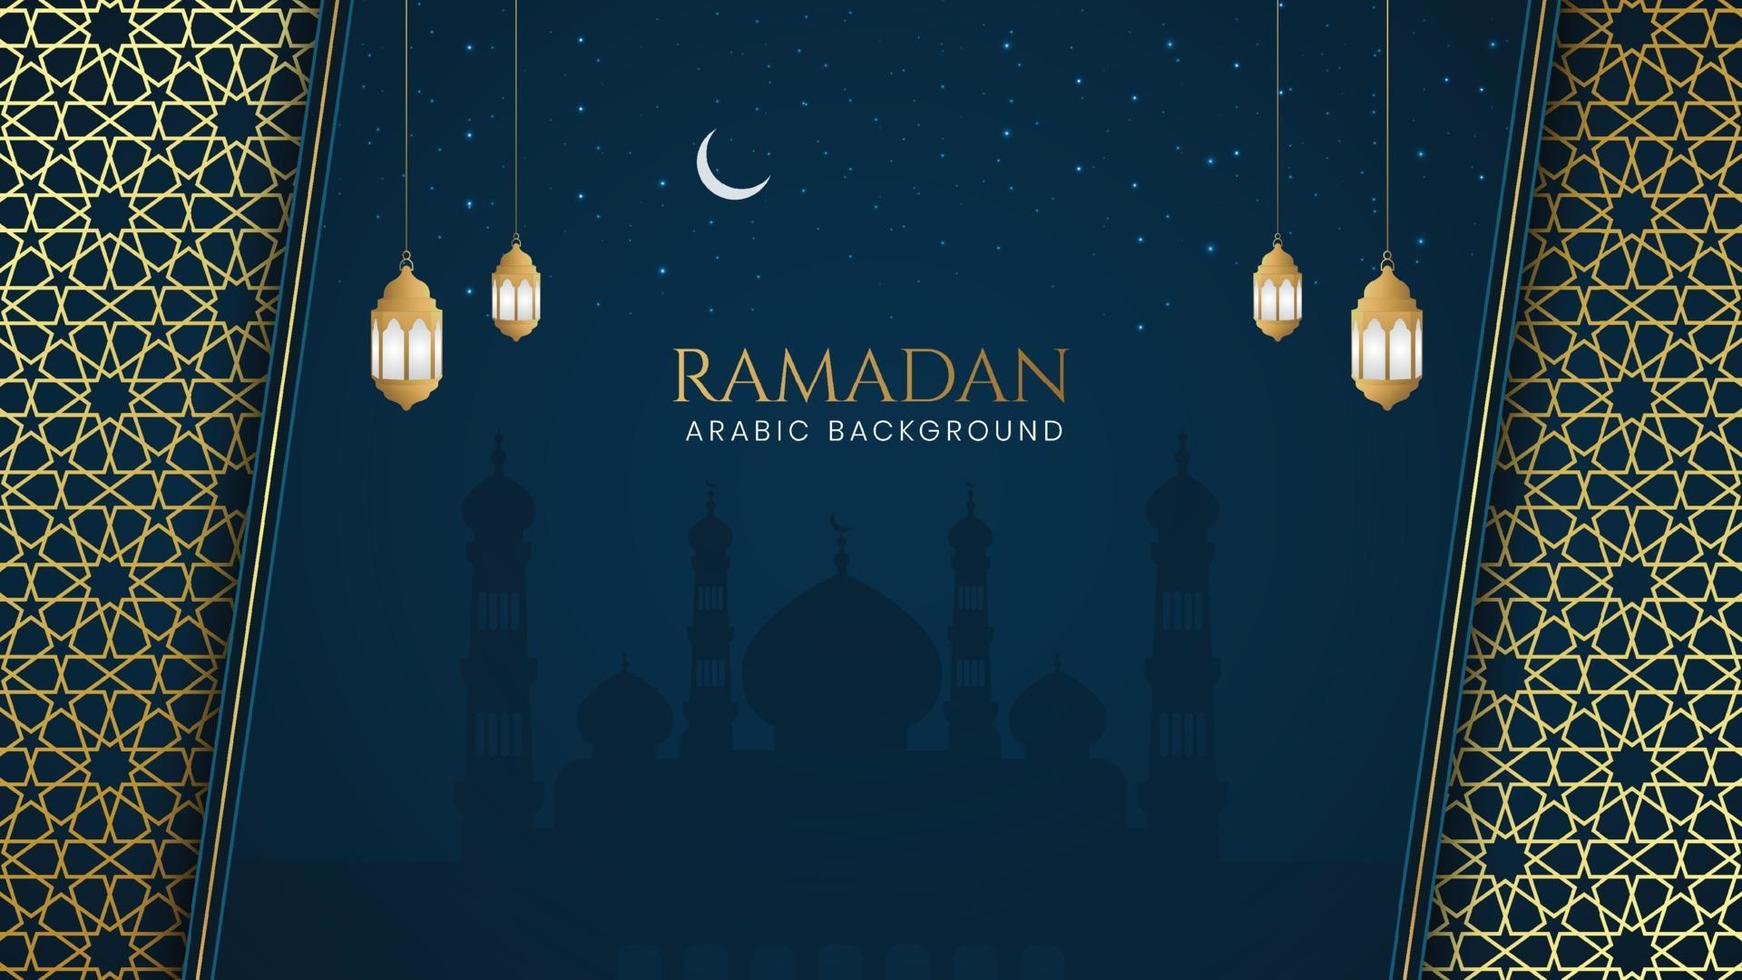 Ramadan Islamic Ornamental Background With Arabic Pattern and Mosque With Lanterns vector